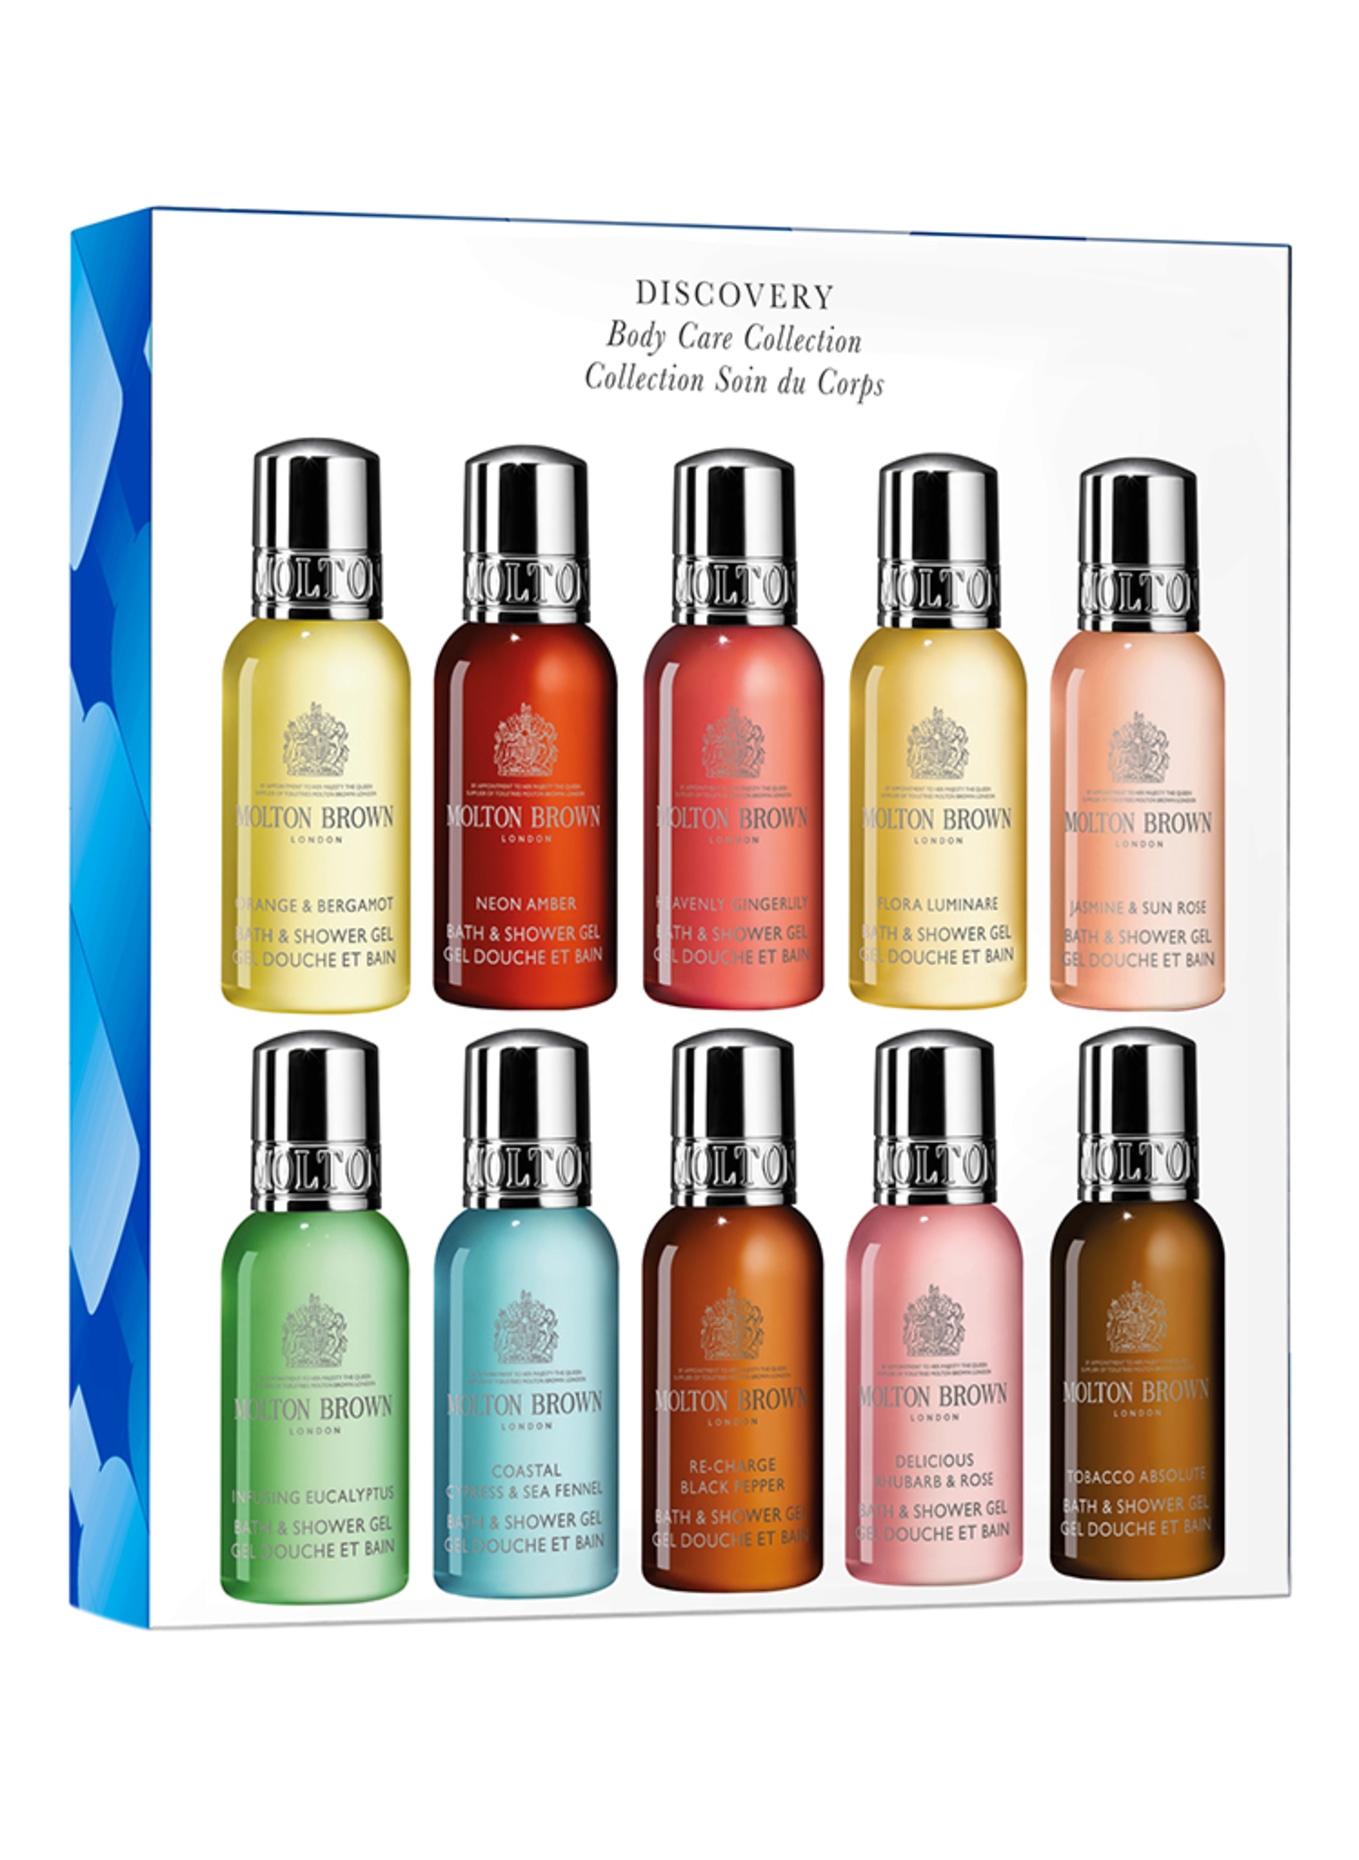 MOLTON BROWN DISCOVERY BODY CARE COLLECTION (Obrazek 1)